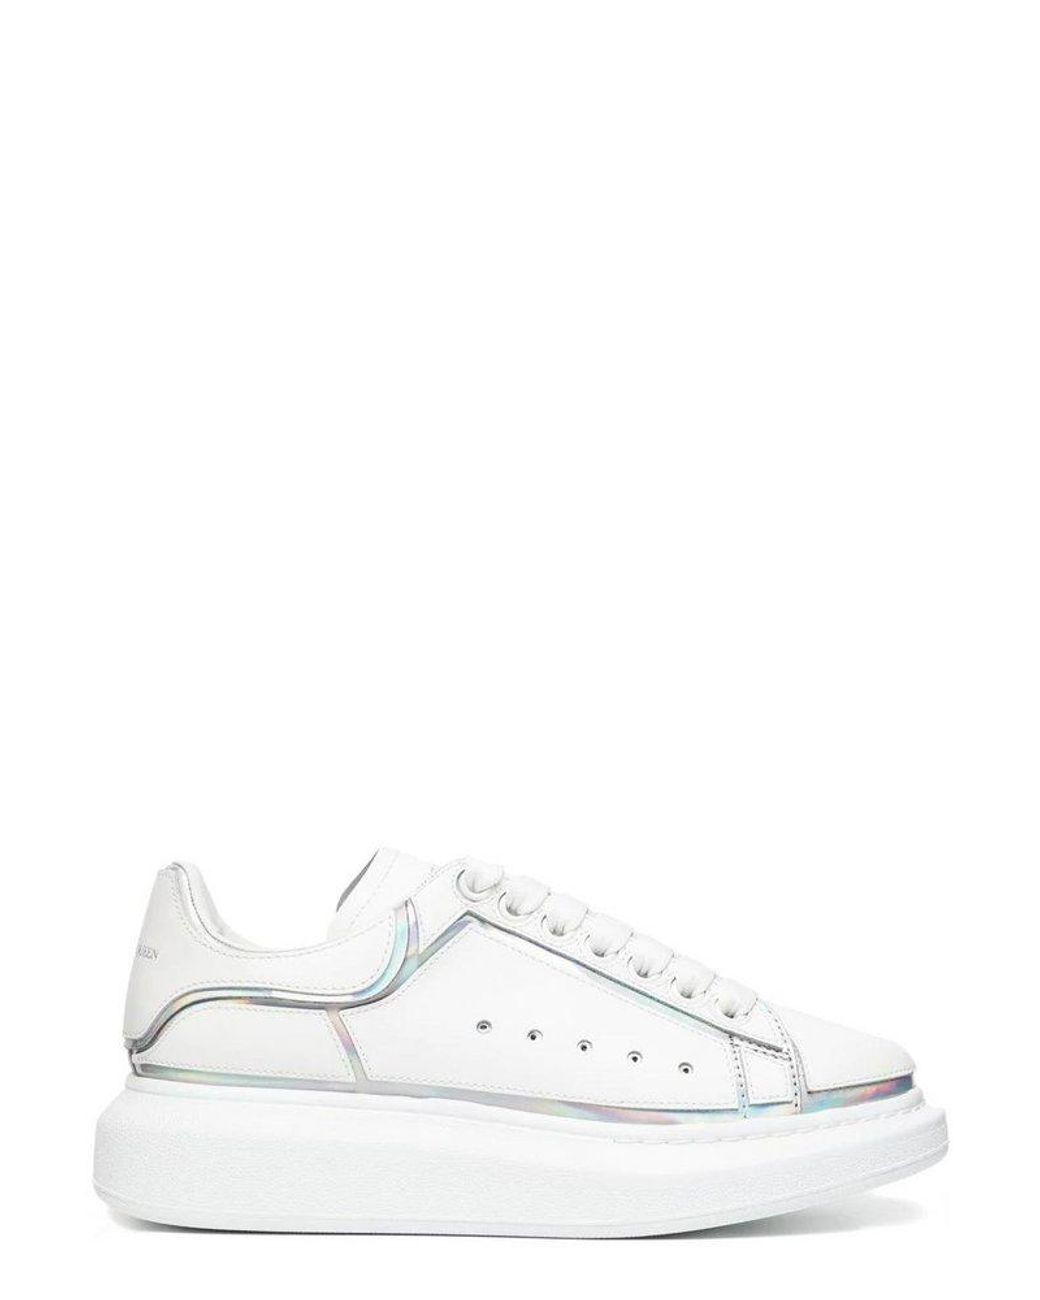 Alexander McQueen Leather Holographic-detailed Oversized Sneakers in ...